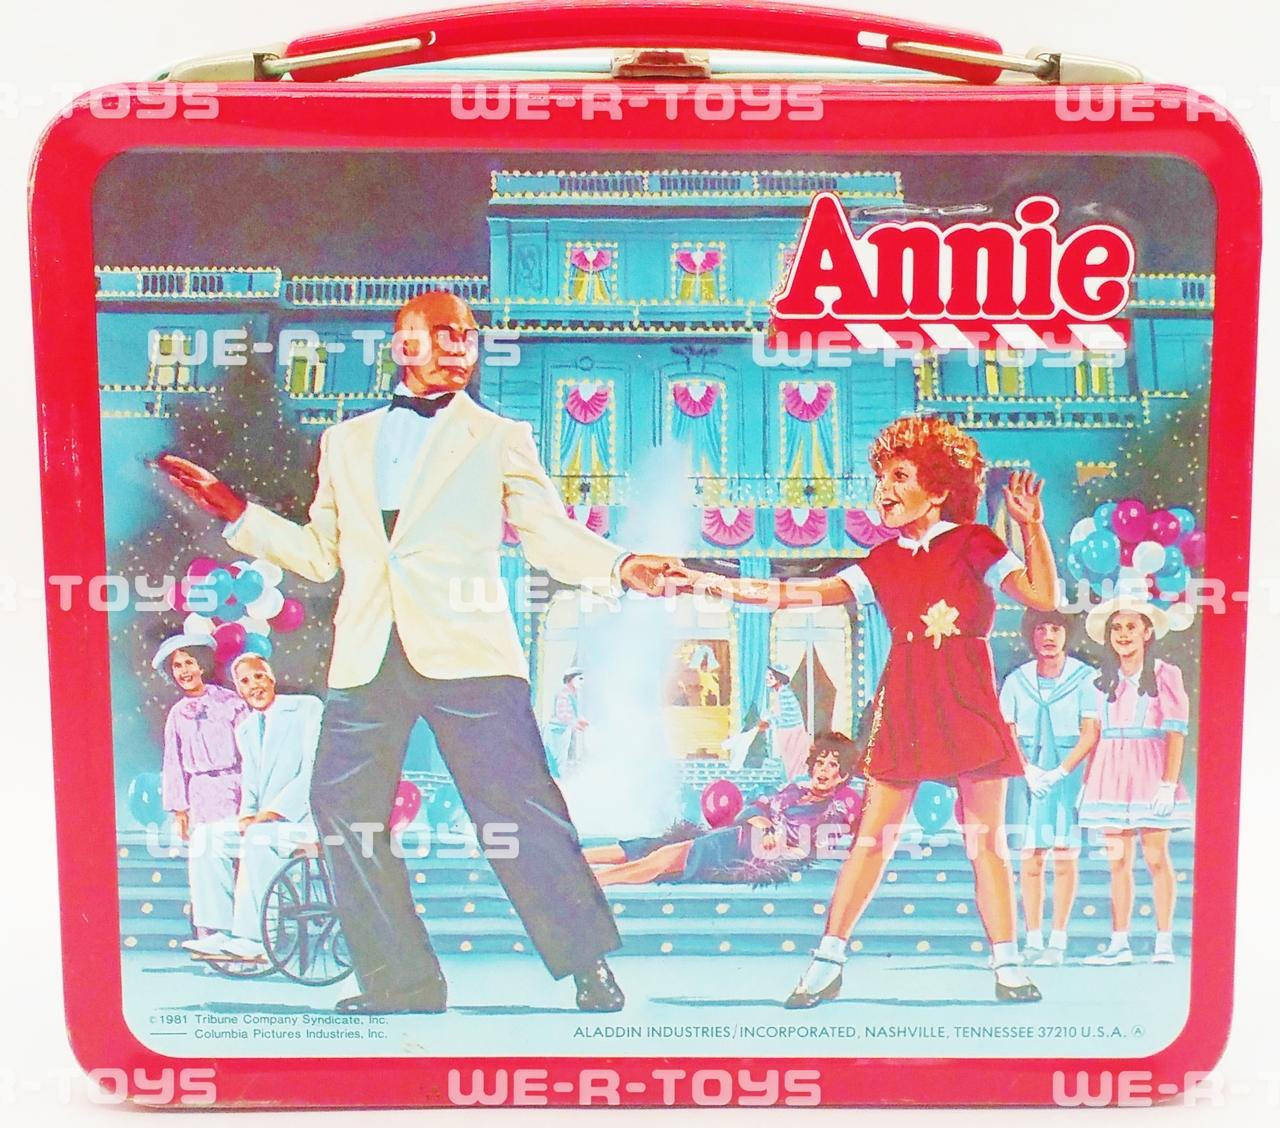 https://cdn11.bigcommerce.com/s-cy4lua1xoh/images/stencil/1280x1280/products/12875/73918/annie-metal-tin-lunchbox-1981-aladdin-industries-and-thermal-cup-used__14561.1654615711.jpg?c=1?imbypass=on